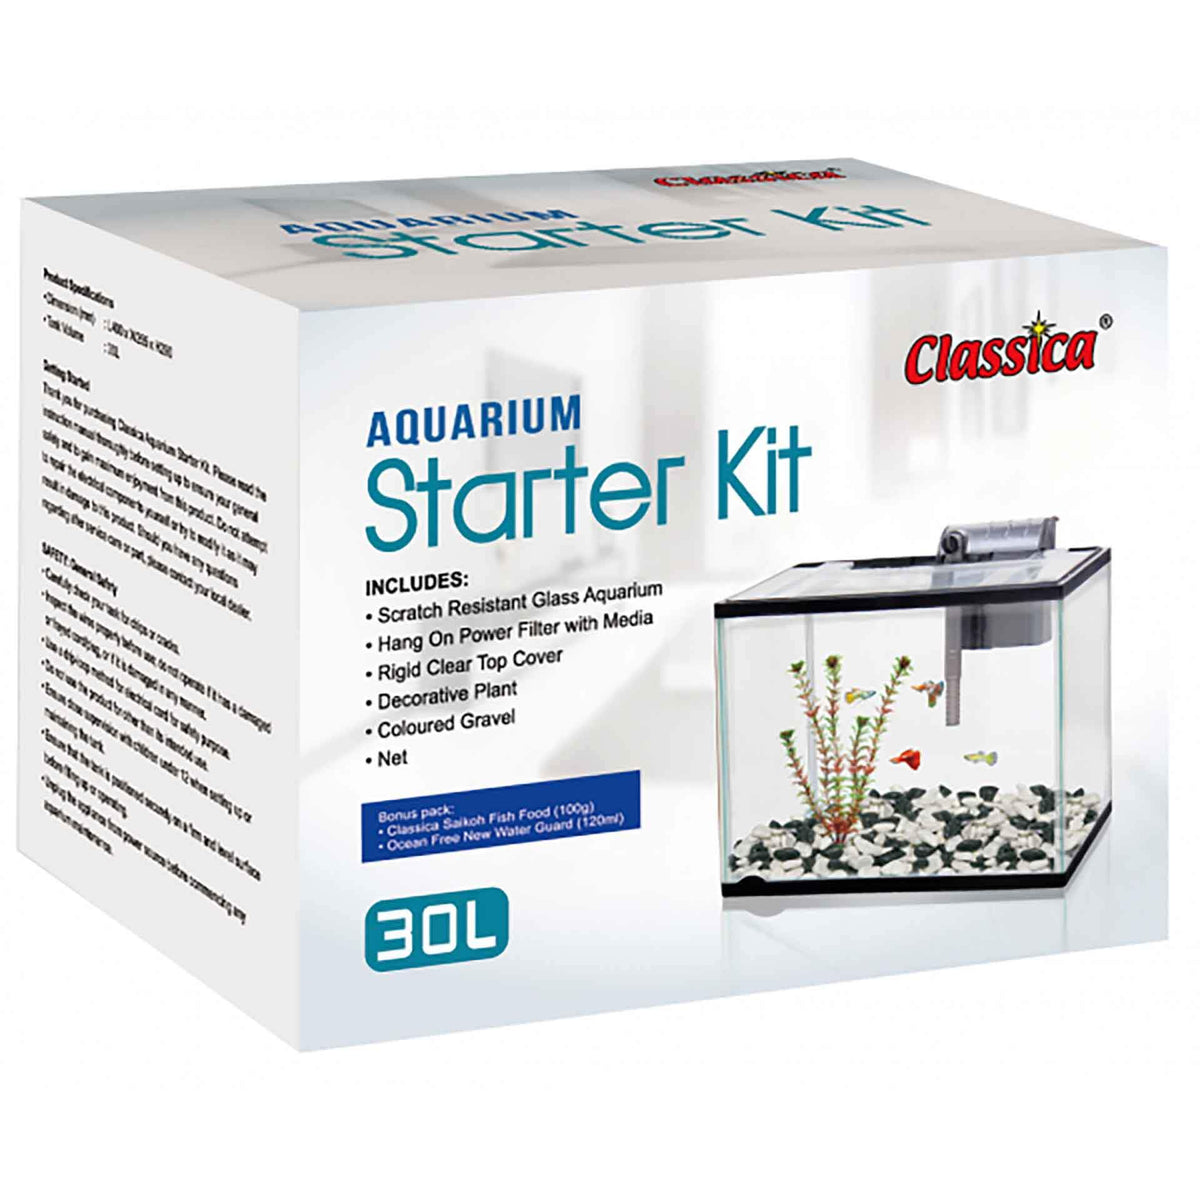 Classica Aquarium Starter Kit Large 30L (40 x 28 x 25) - In Store Pick Up Only